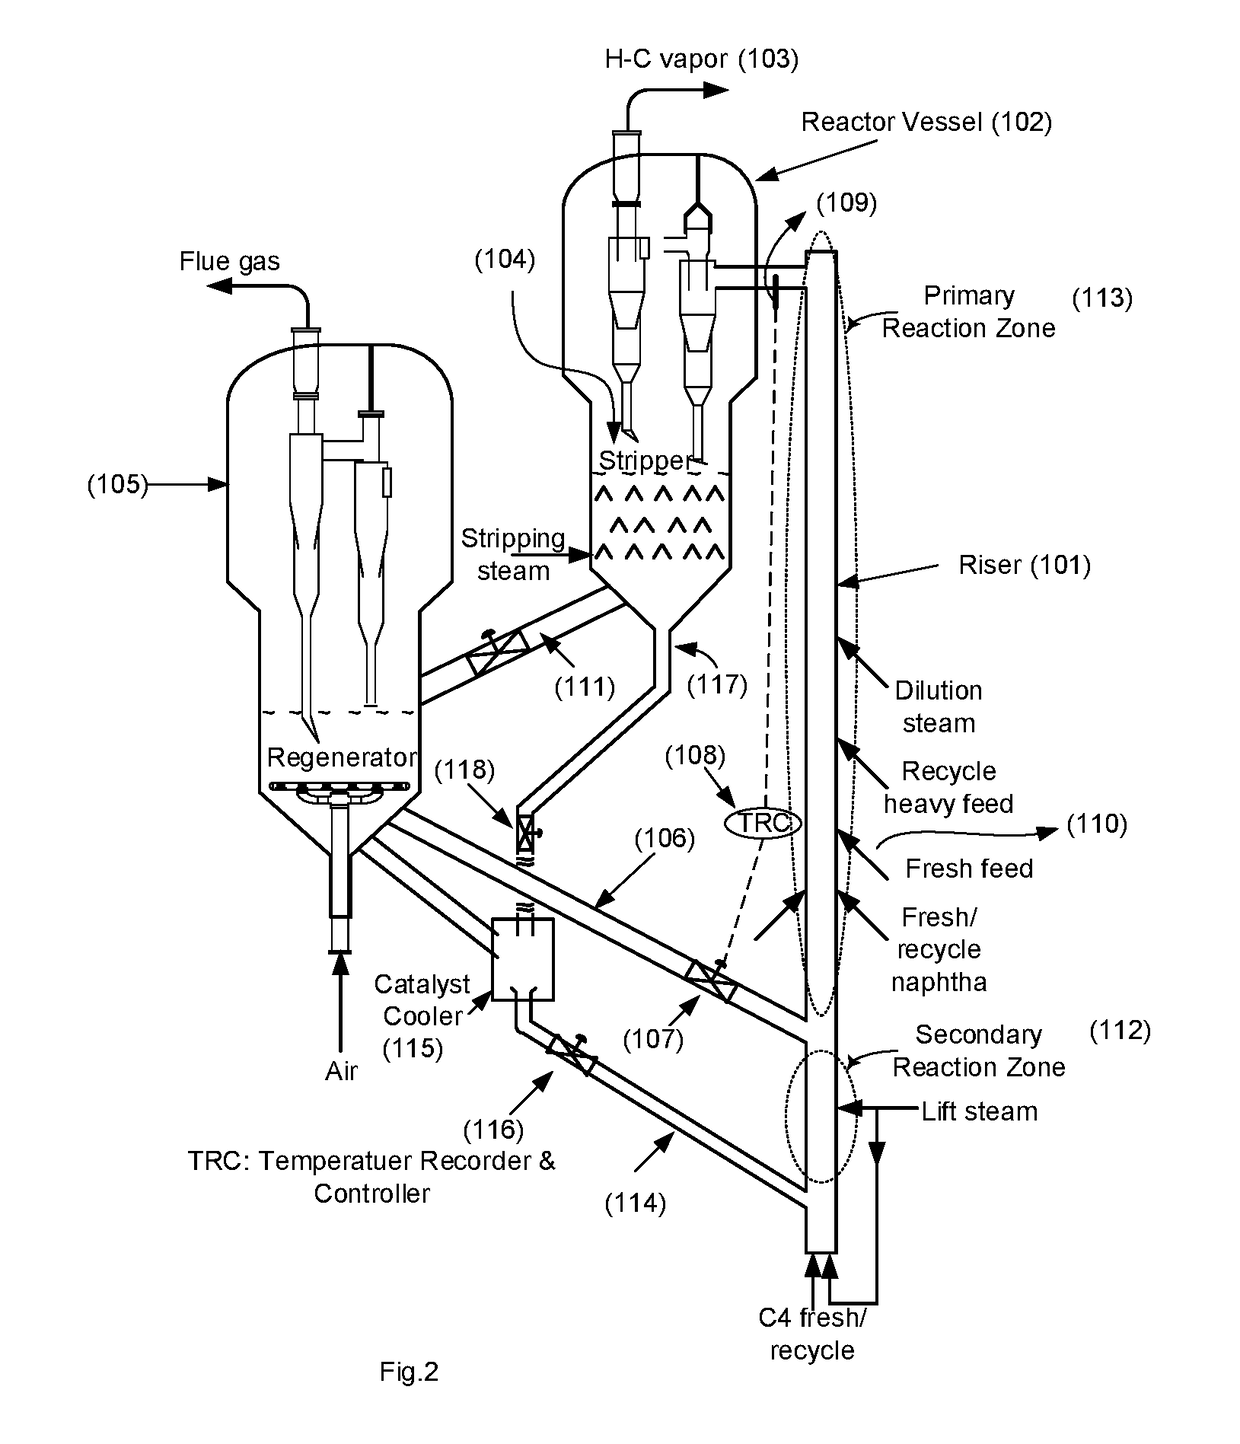 Production of propylene in a fluid catalytic cracking unit